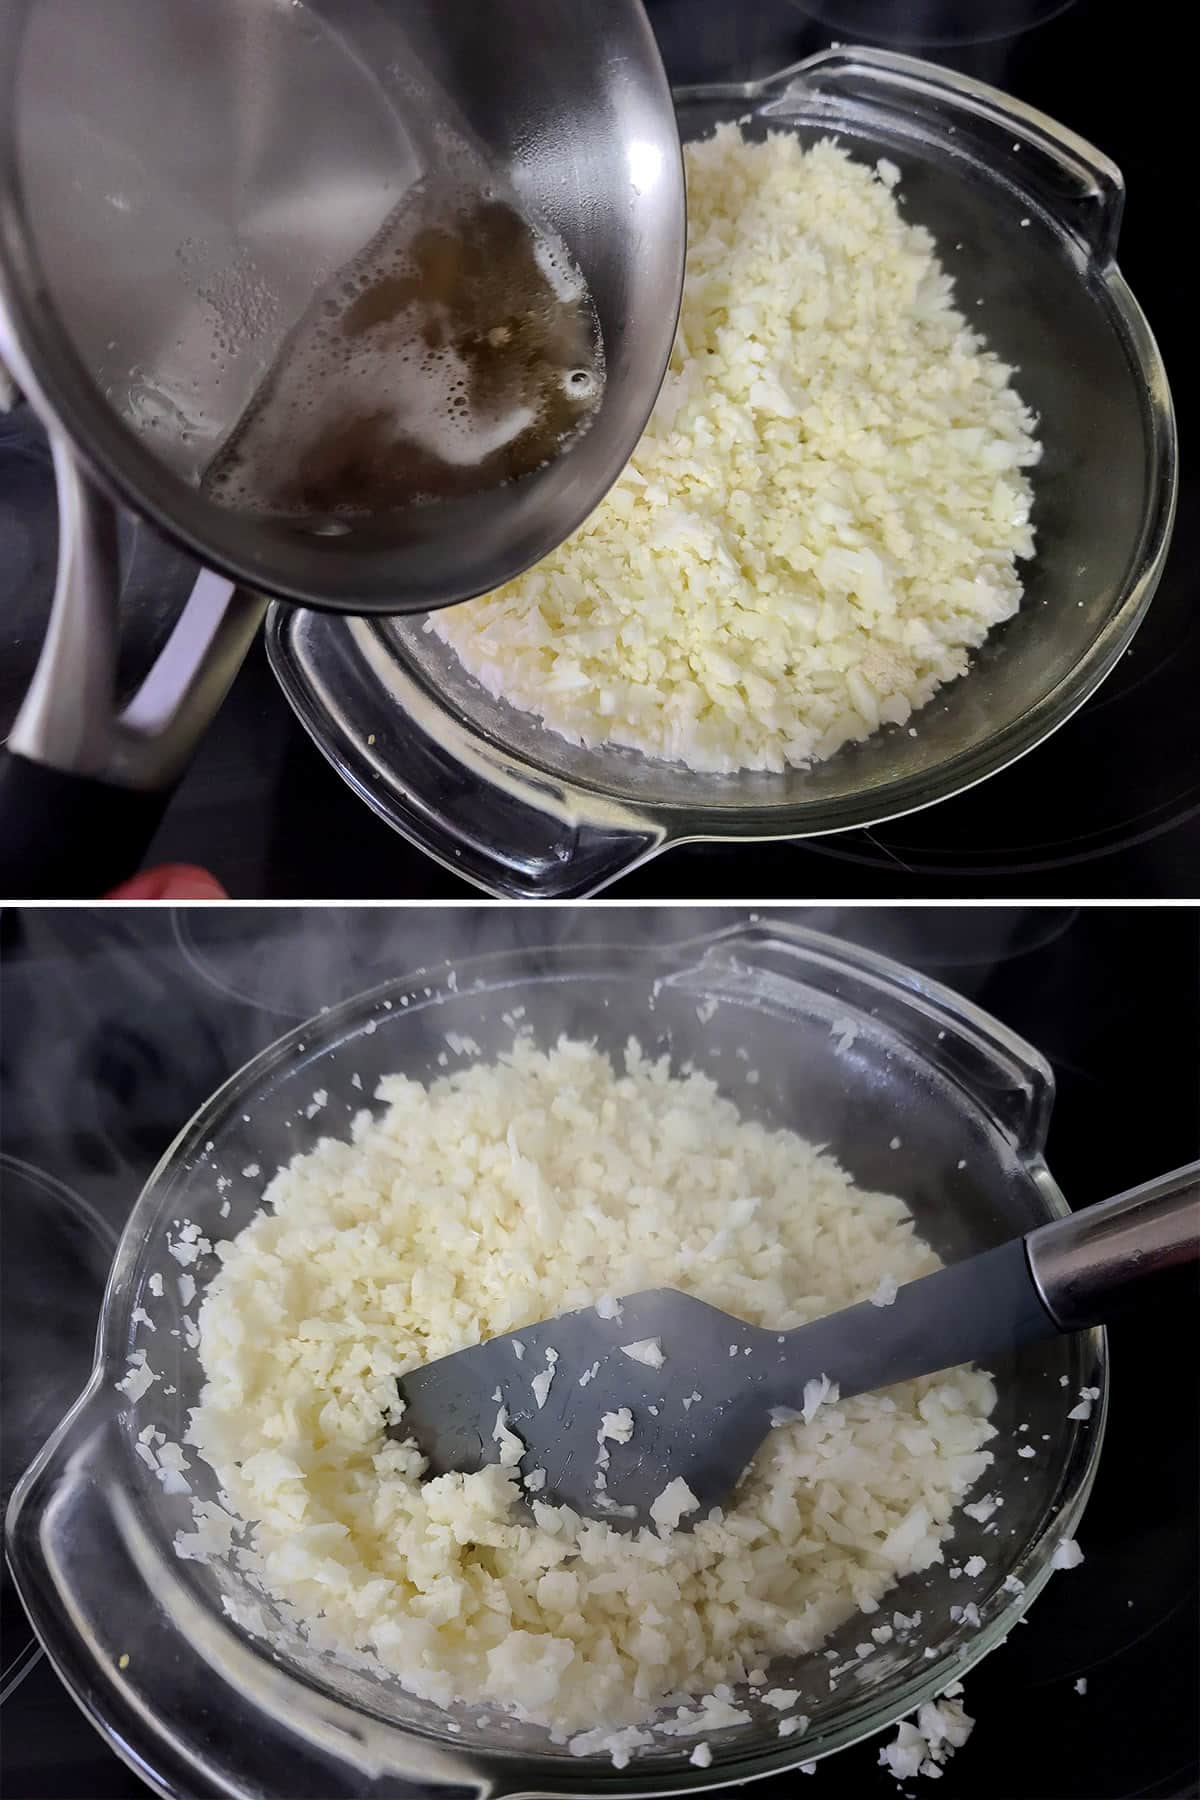 A 2 part image showing seasoned vinegar being poured onto cooked cauliflower rice and stirred in.